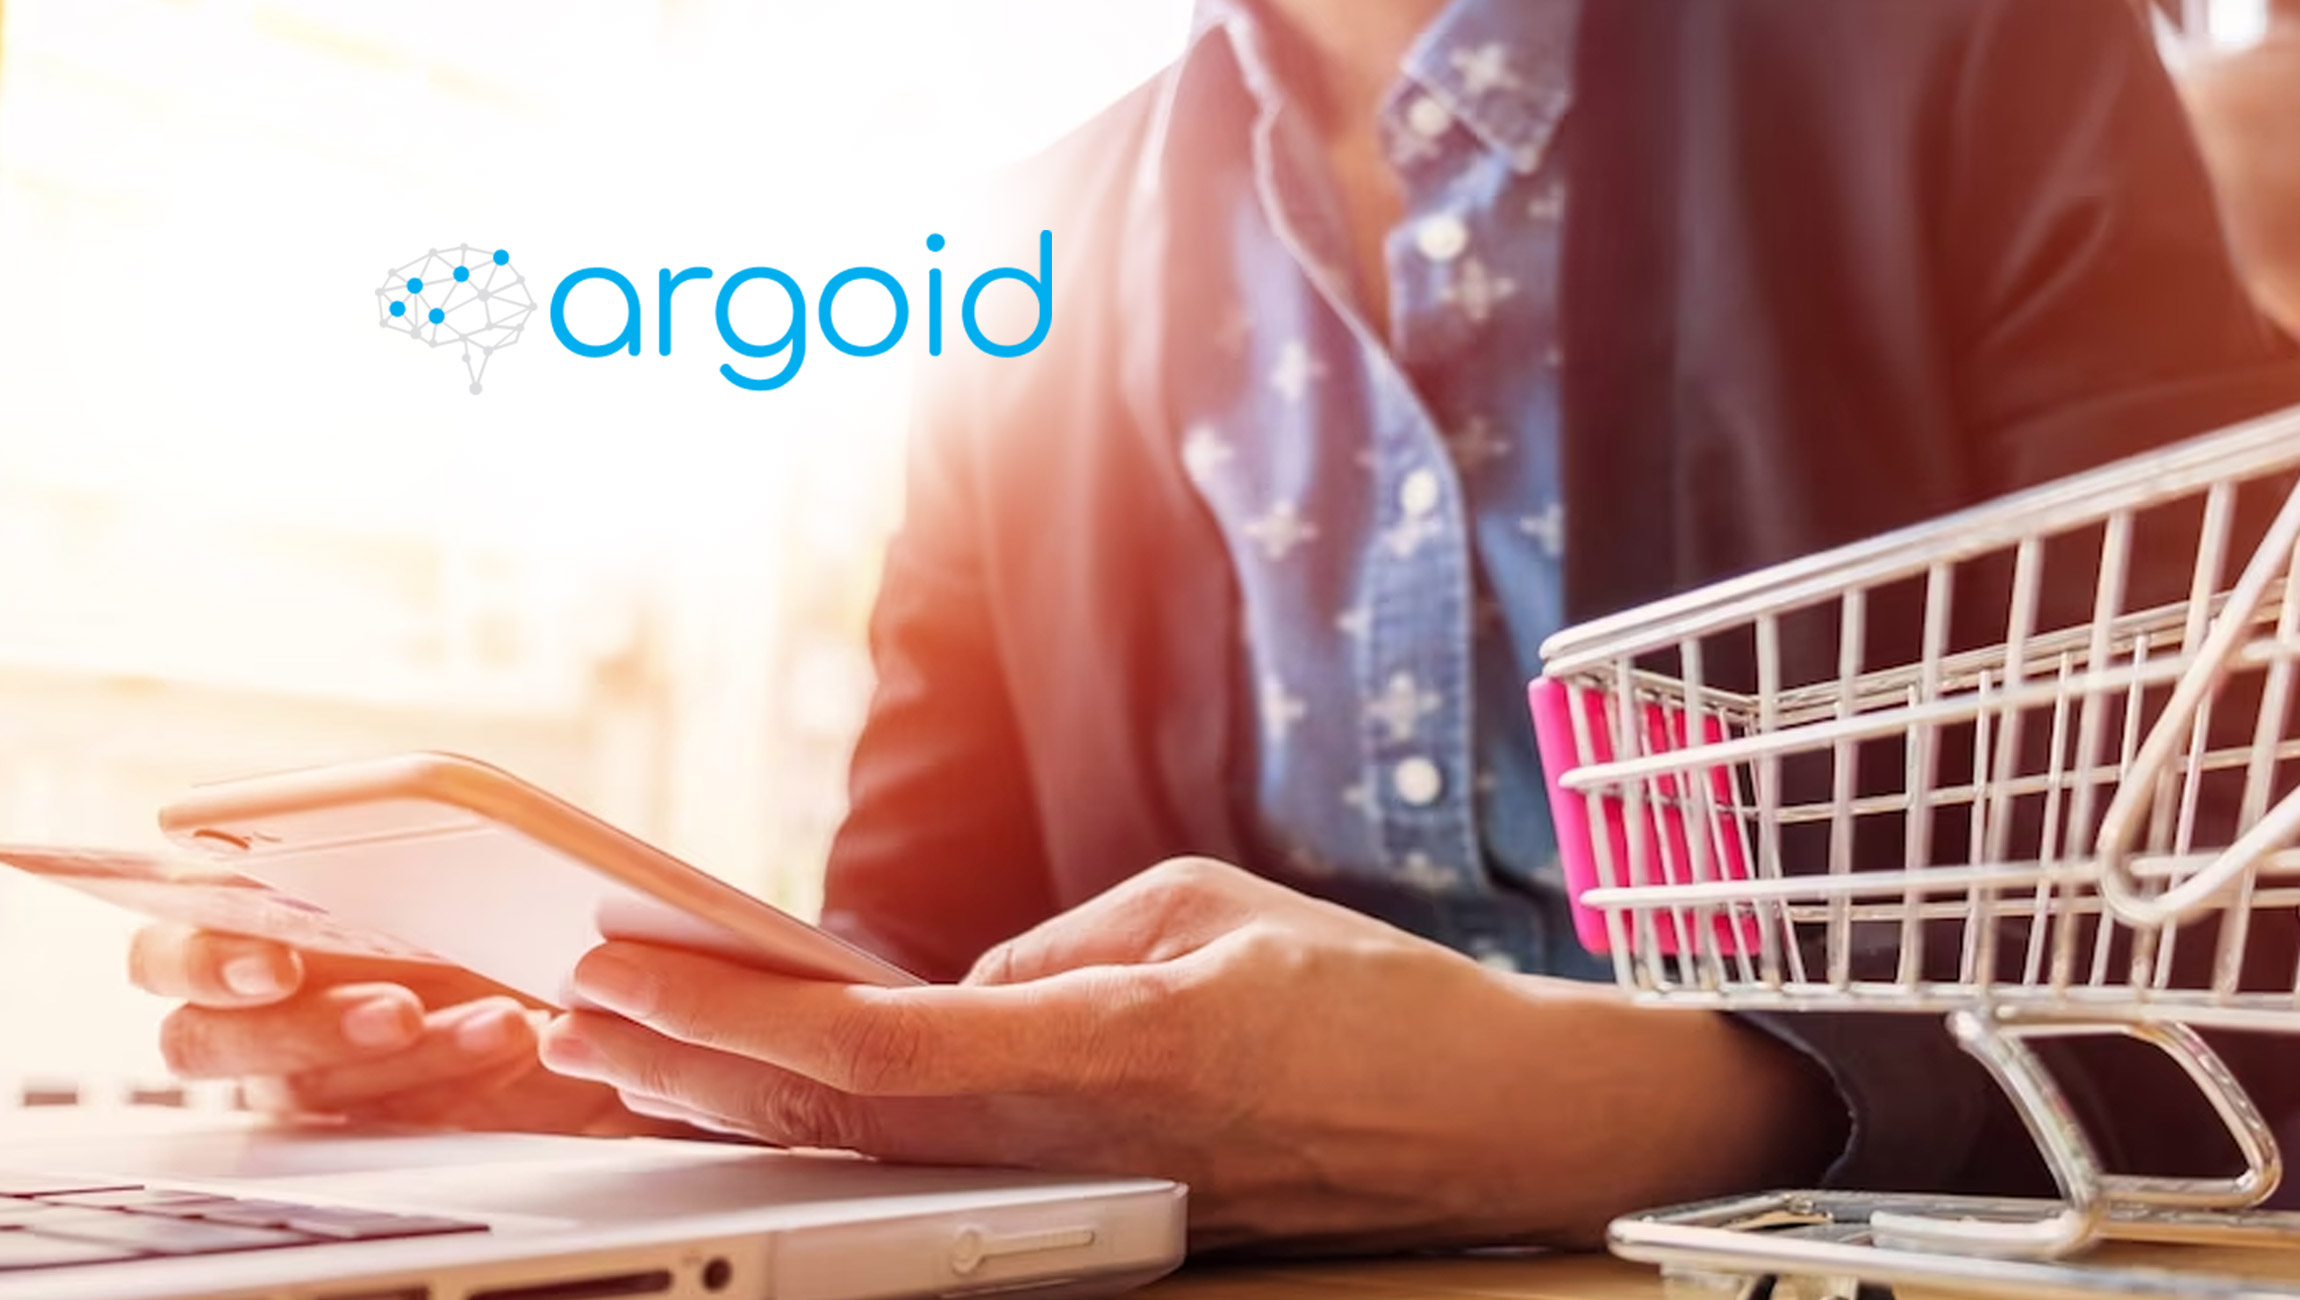 Argoid AI Delivers Over 500 Million AI-based Personalized Recommendations for Ecommerce